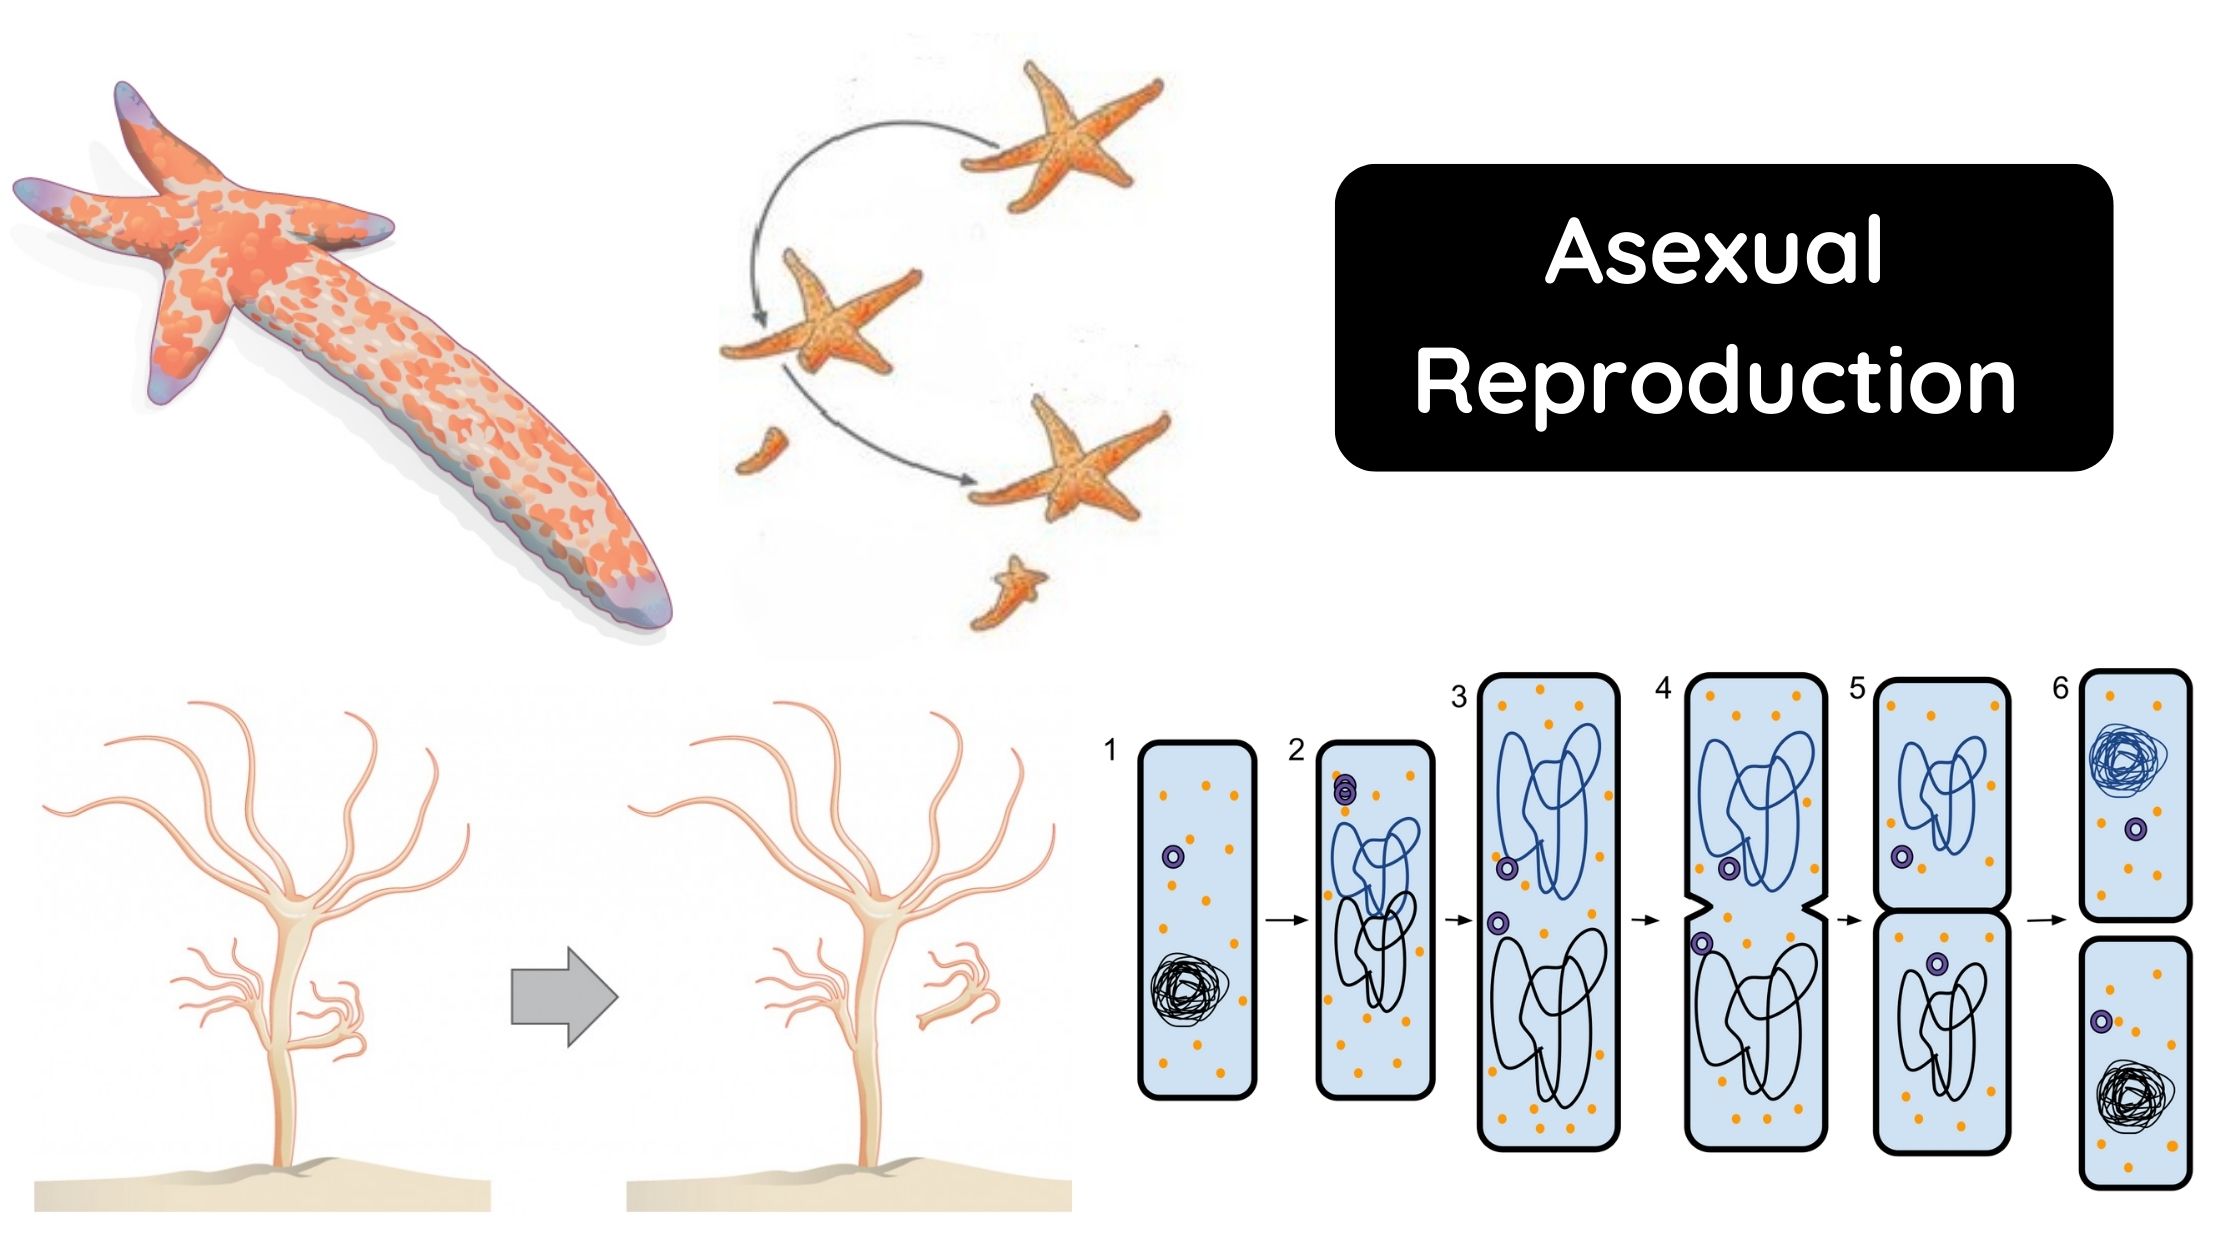 Asexual Reproduction in bacteria - Definition, Types, Advantages, Disadvantages